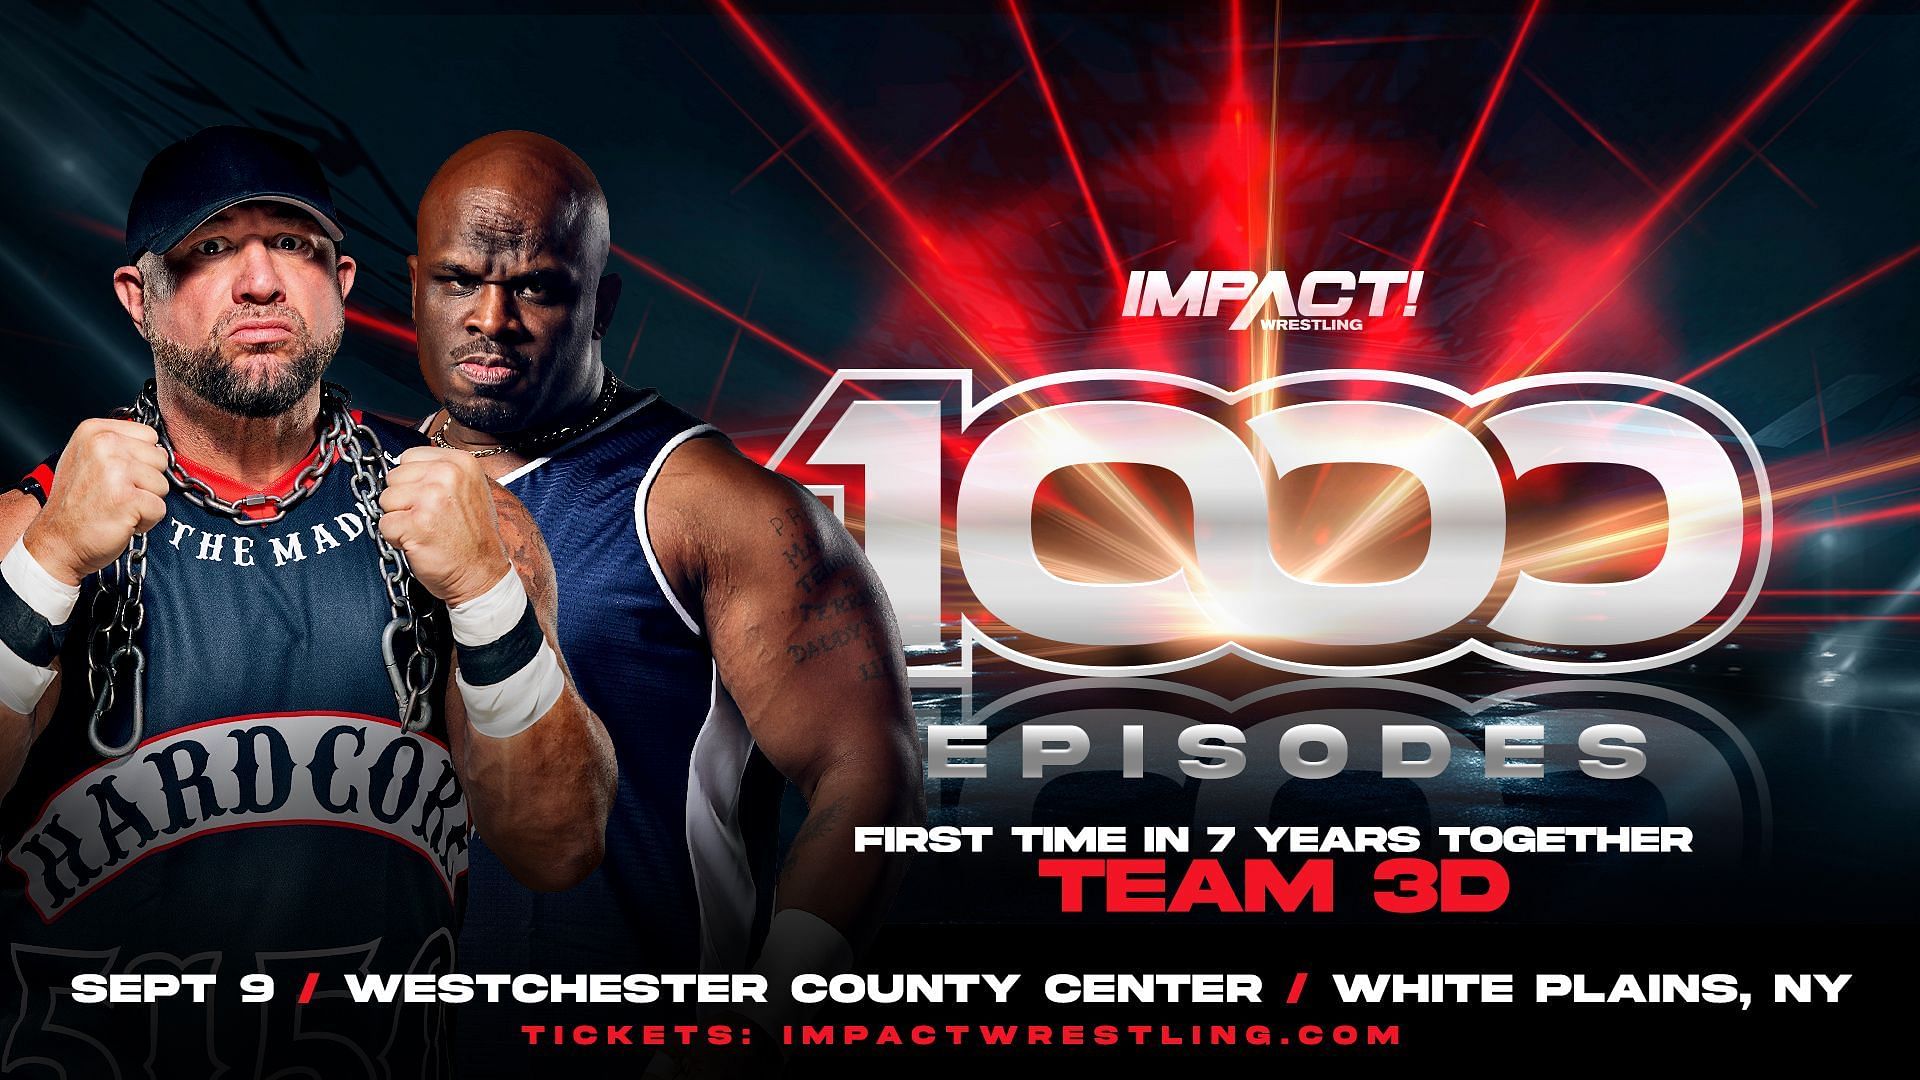 The Dudley re-united at IMPACT 1000 tapings